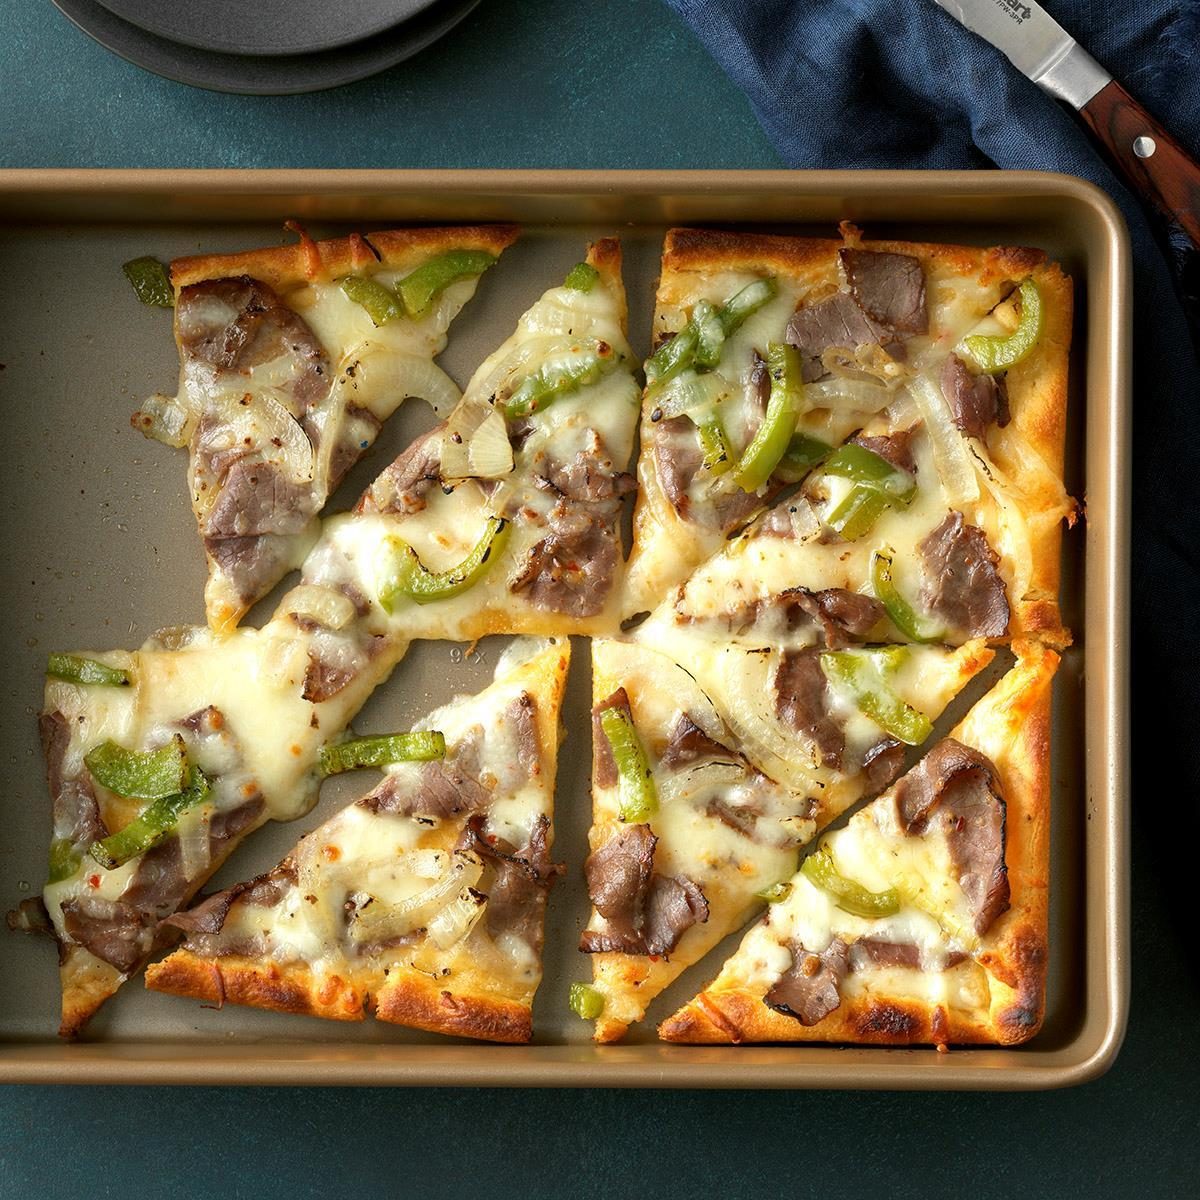 Philly Cheese Steak Pizza Exps 13x9bz19 22448 C10 05 10b 7